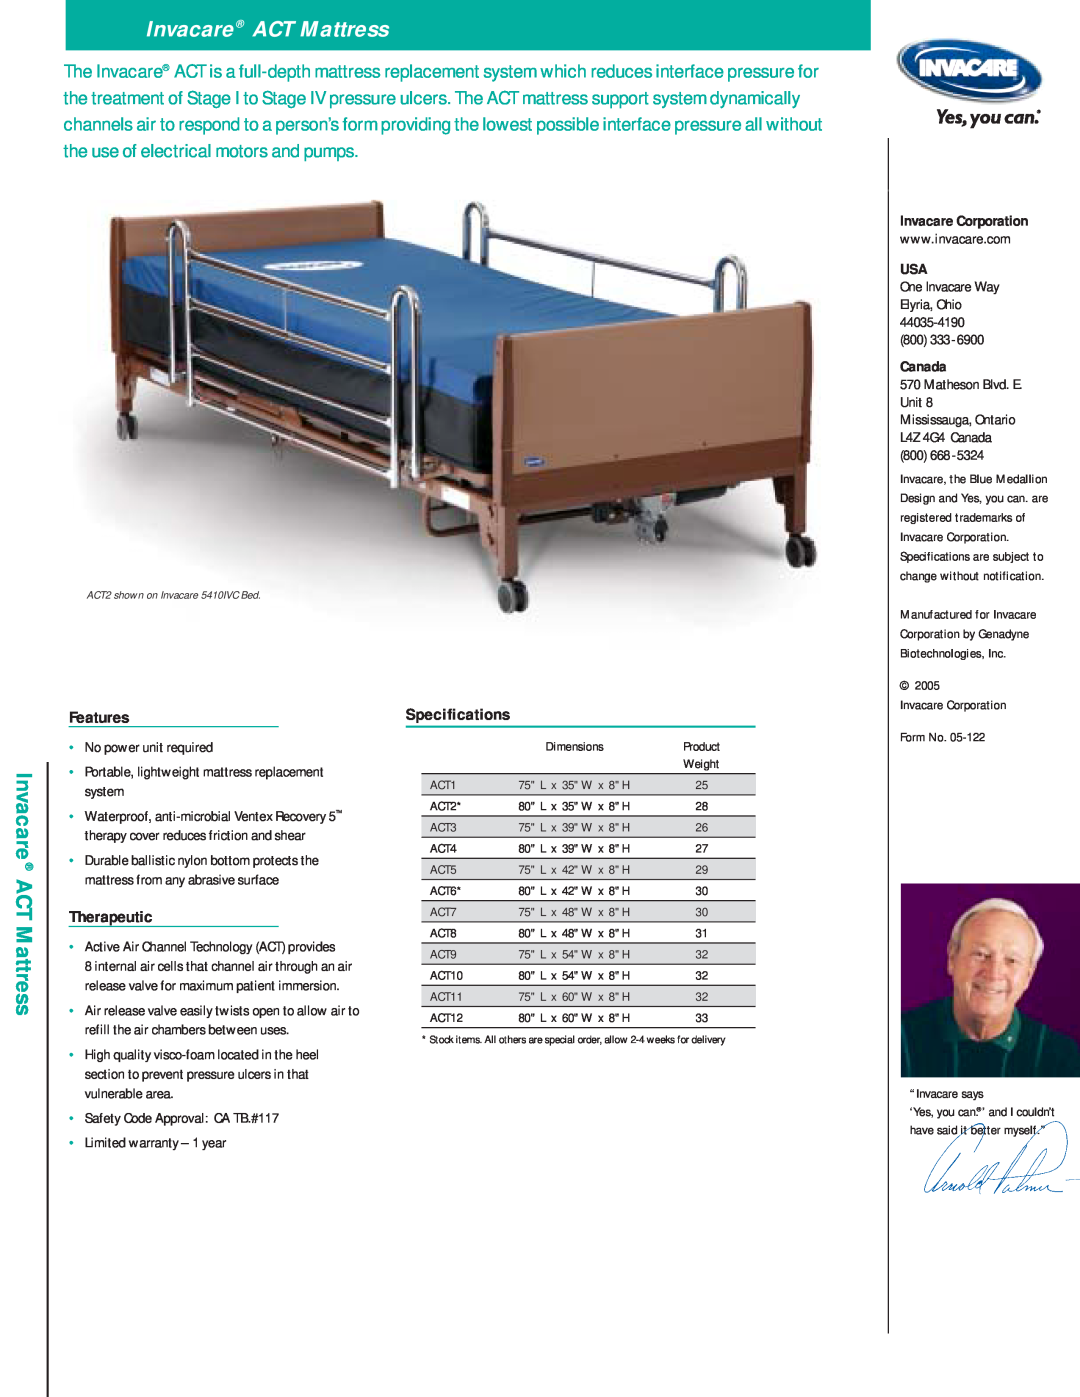 Invacare Invacare ACT Mattress, Features, Therapeutic, Specifications, Invacare Corporation, 44035-4190 800, Canada 